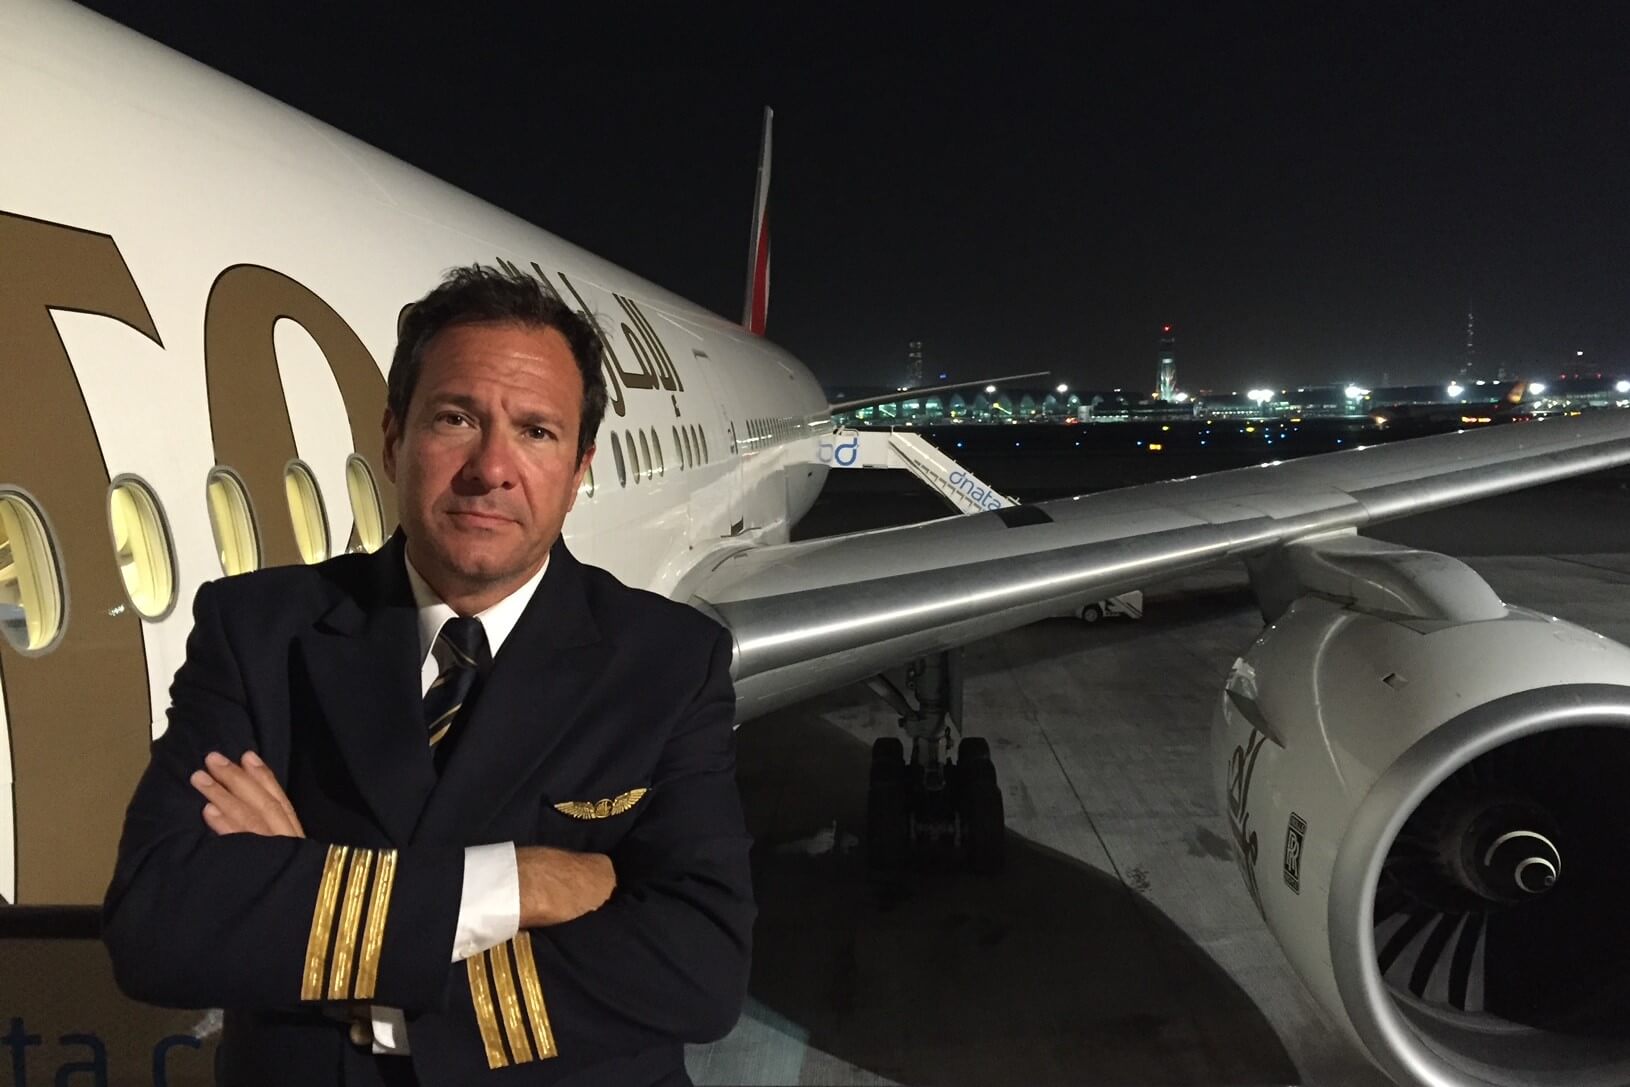 Emirates pilot Massimo: what are perspectives for experienced pil